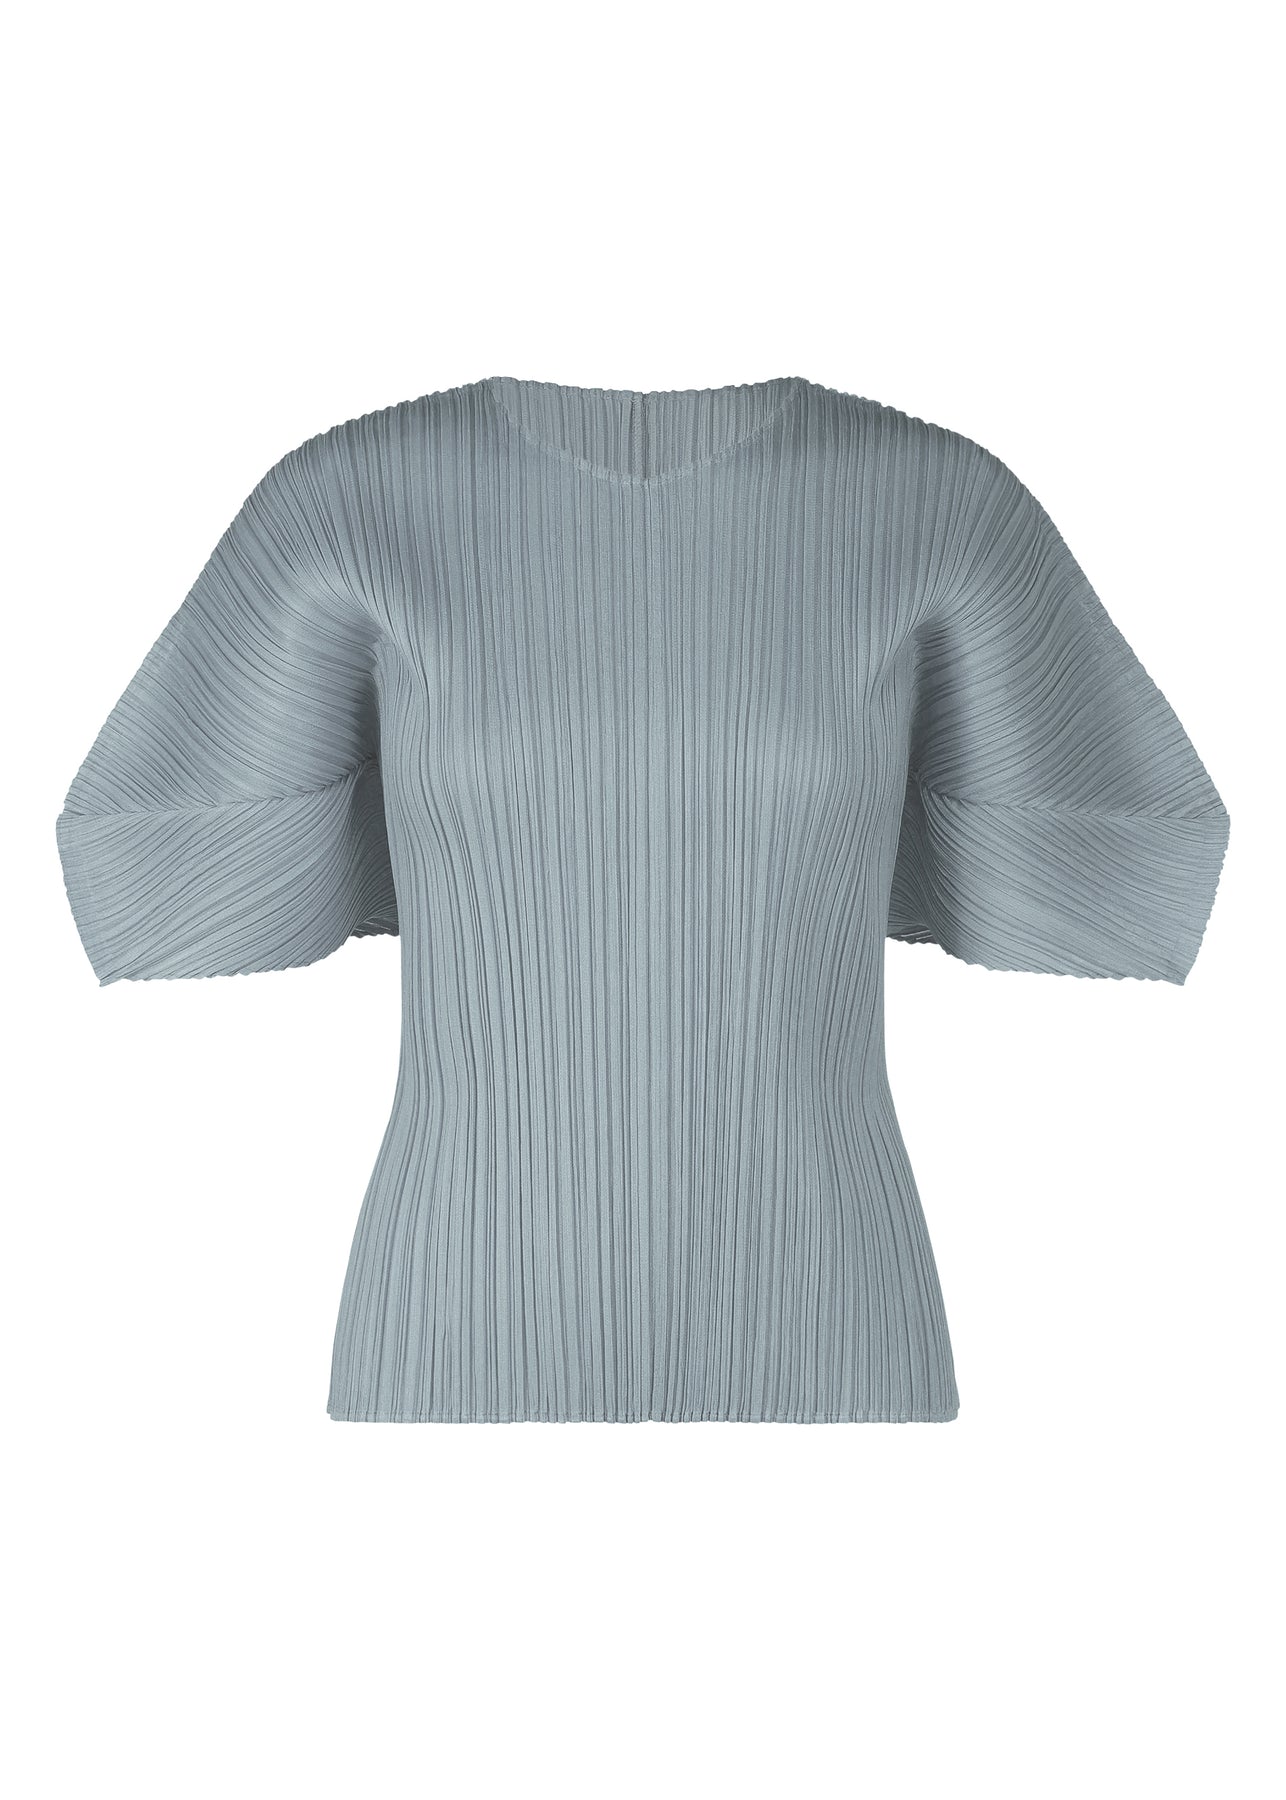 MONTHLY COLORS : AUGUST TOP | The official ISSEY MIYAKE ONLINE